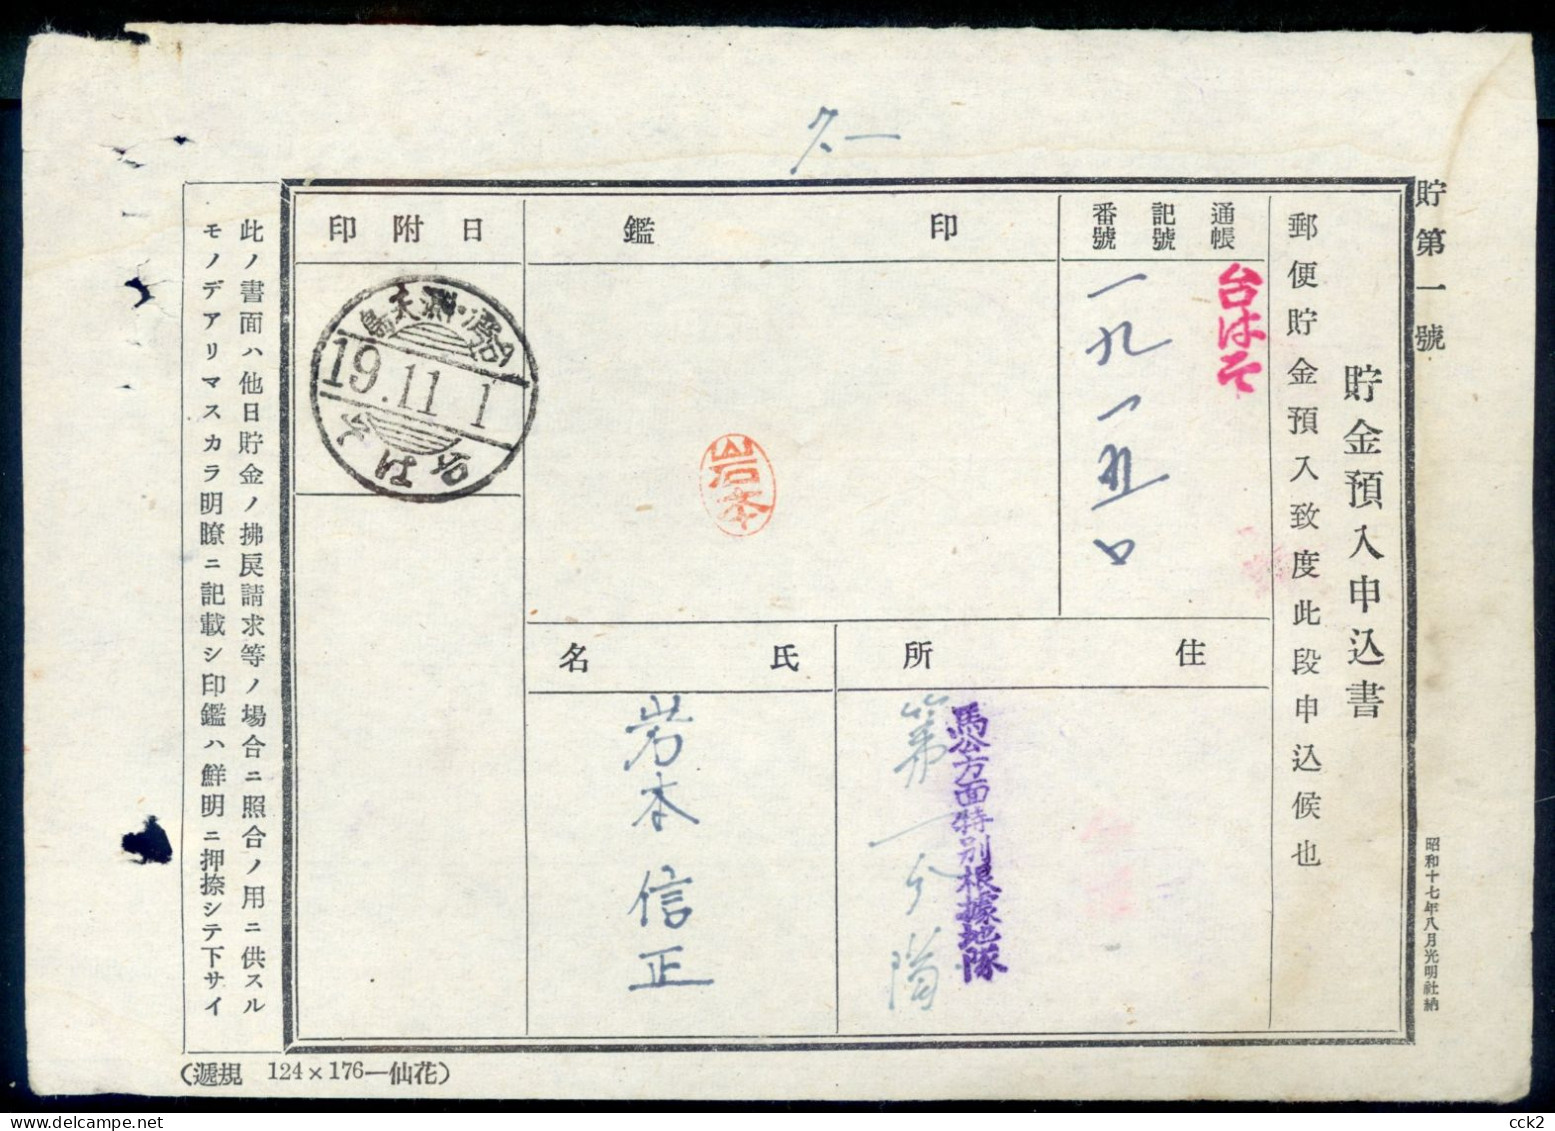 JAPAN OCCUPATION TAIWAN- Reserve Fund Early Entry Application Form(Taiwan Cetian Island) 19.11.1 - 1945 Japanese Occupation